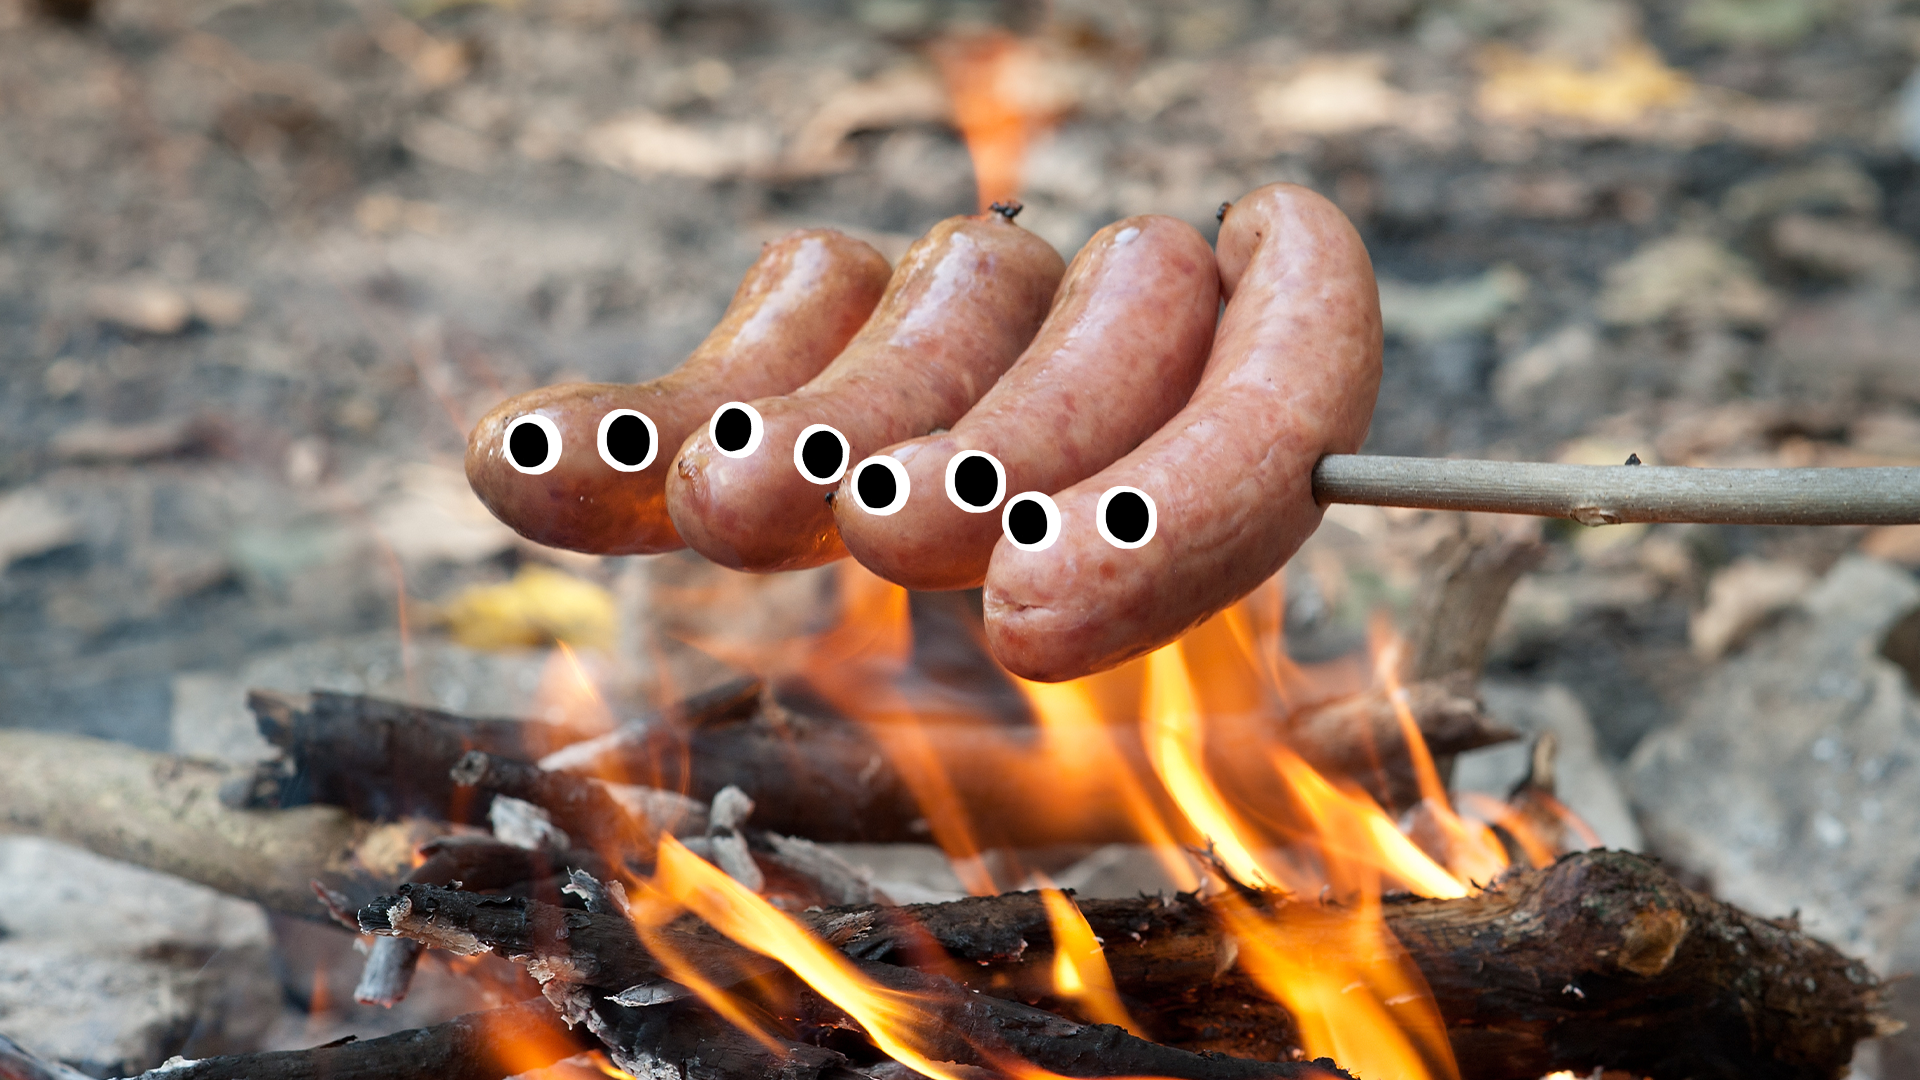 Sausauges with googly eyes being cooked on campfire